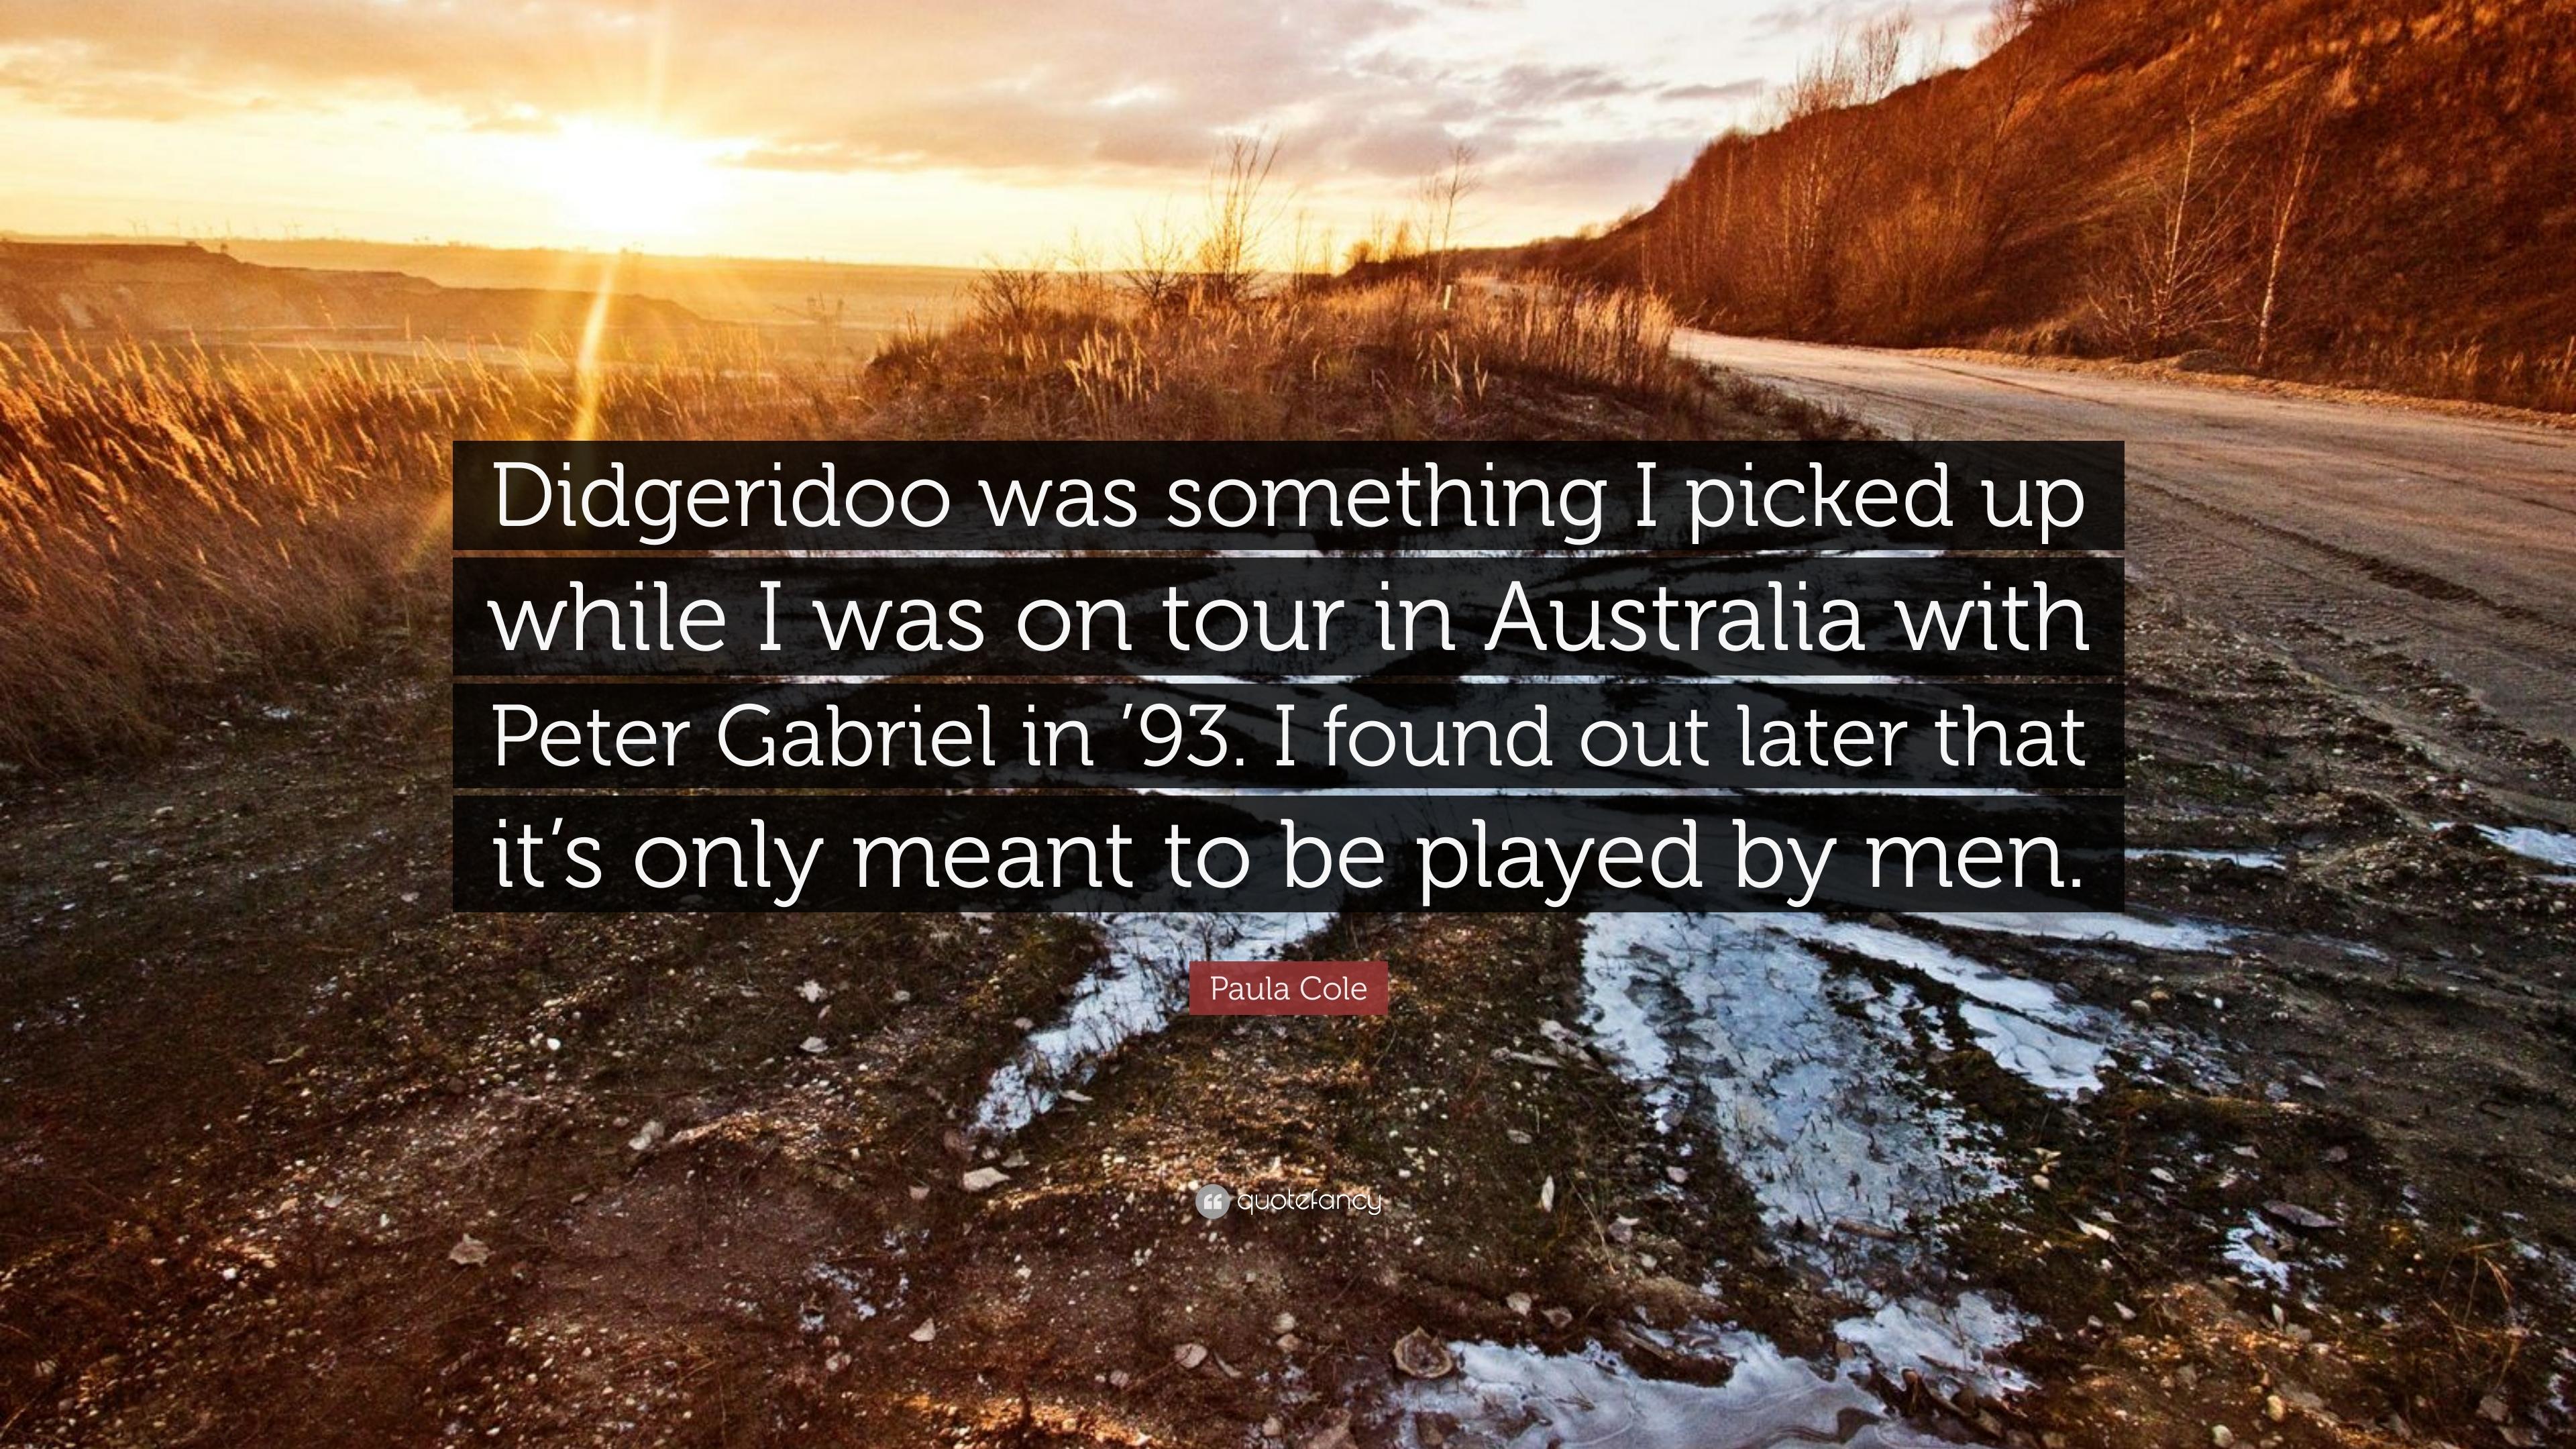 Paula Cole Quote: “Didgeridoo was something I picked up while I was